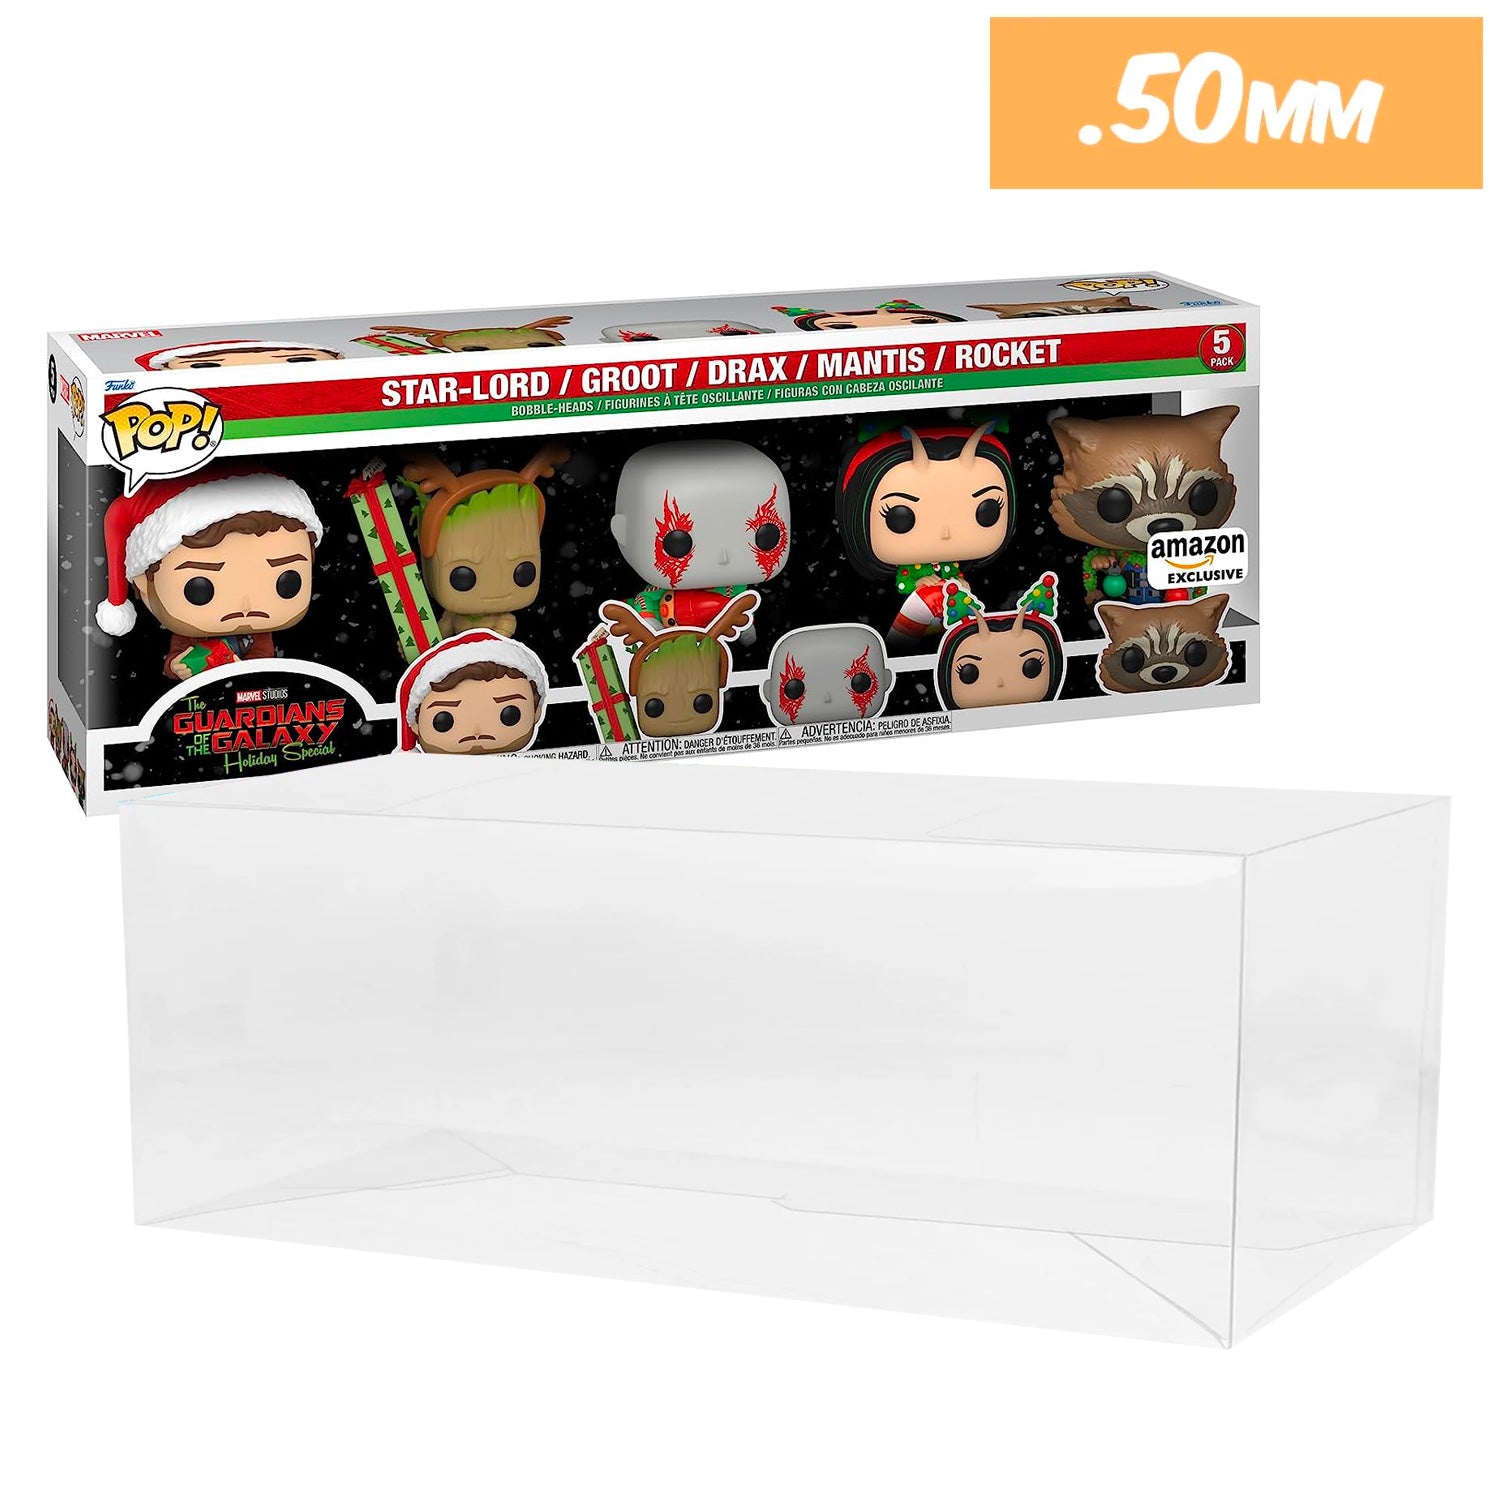 Pop Fiend Special Sized Funko Protection